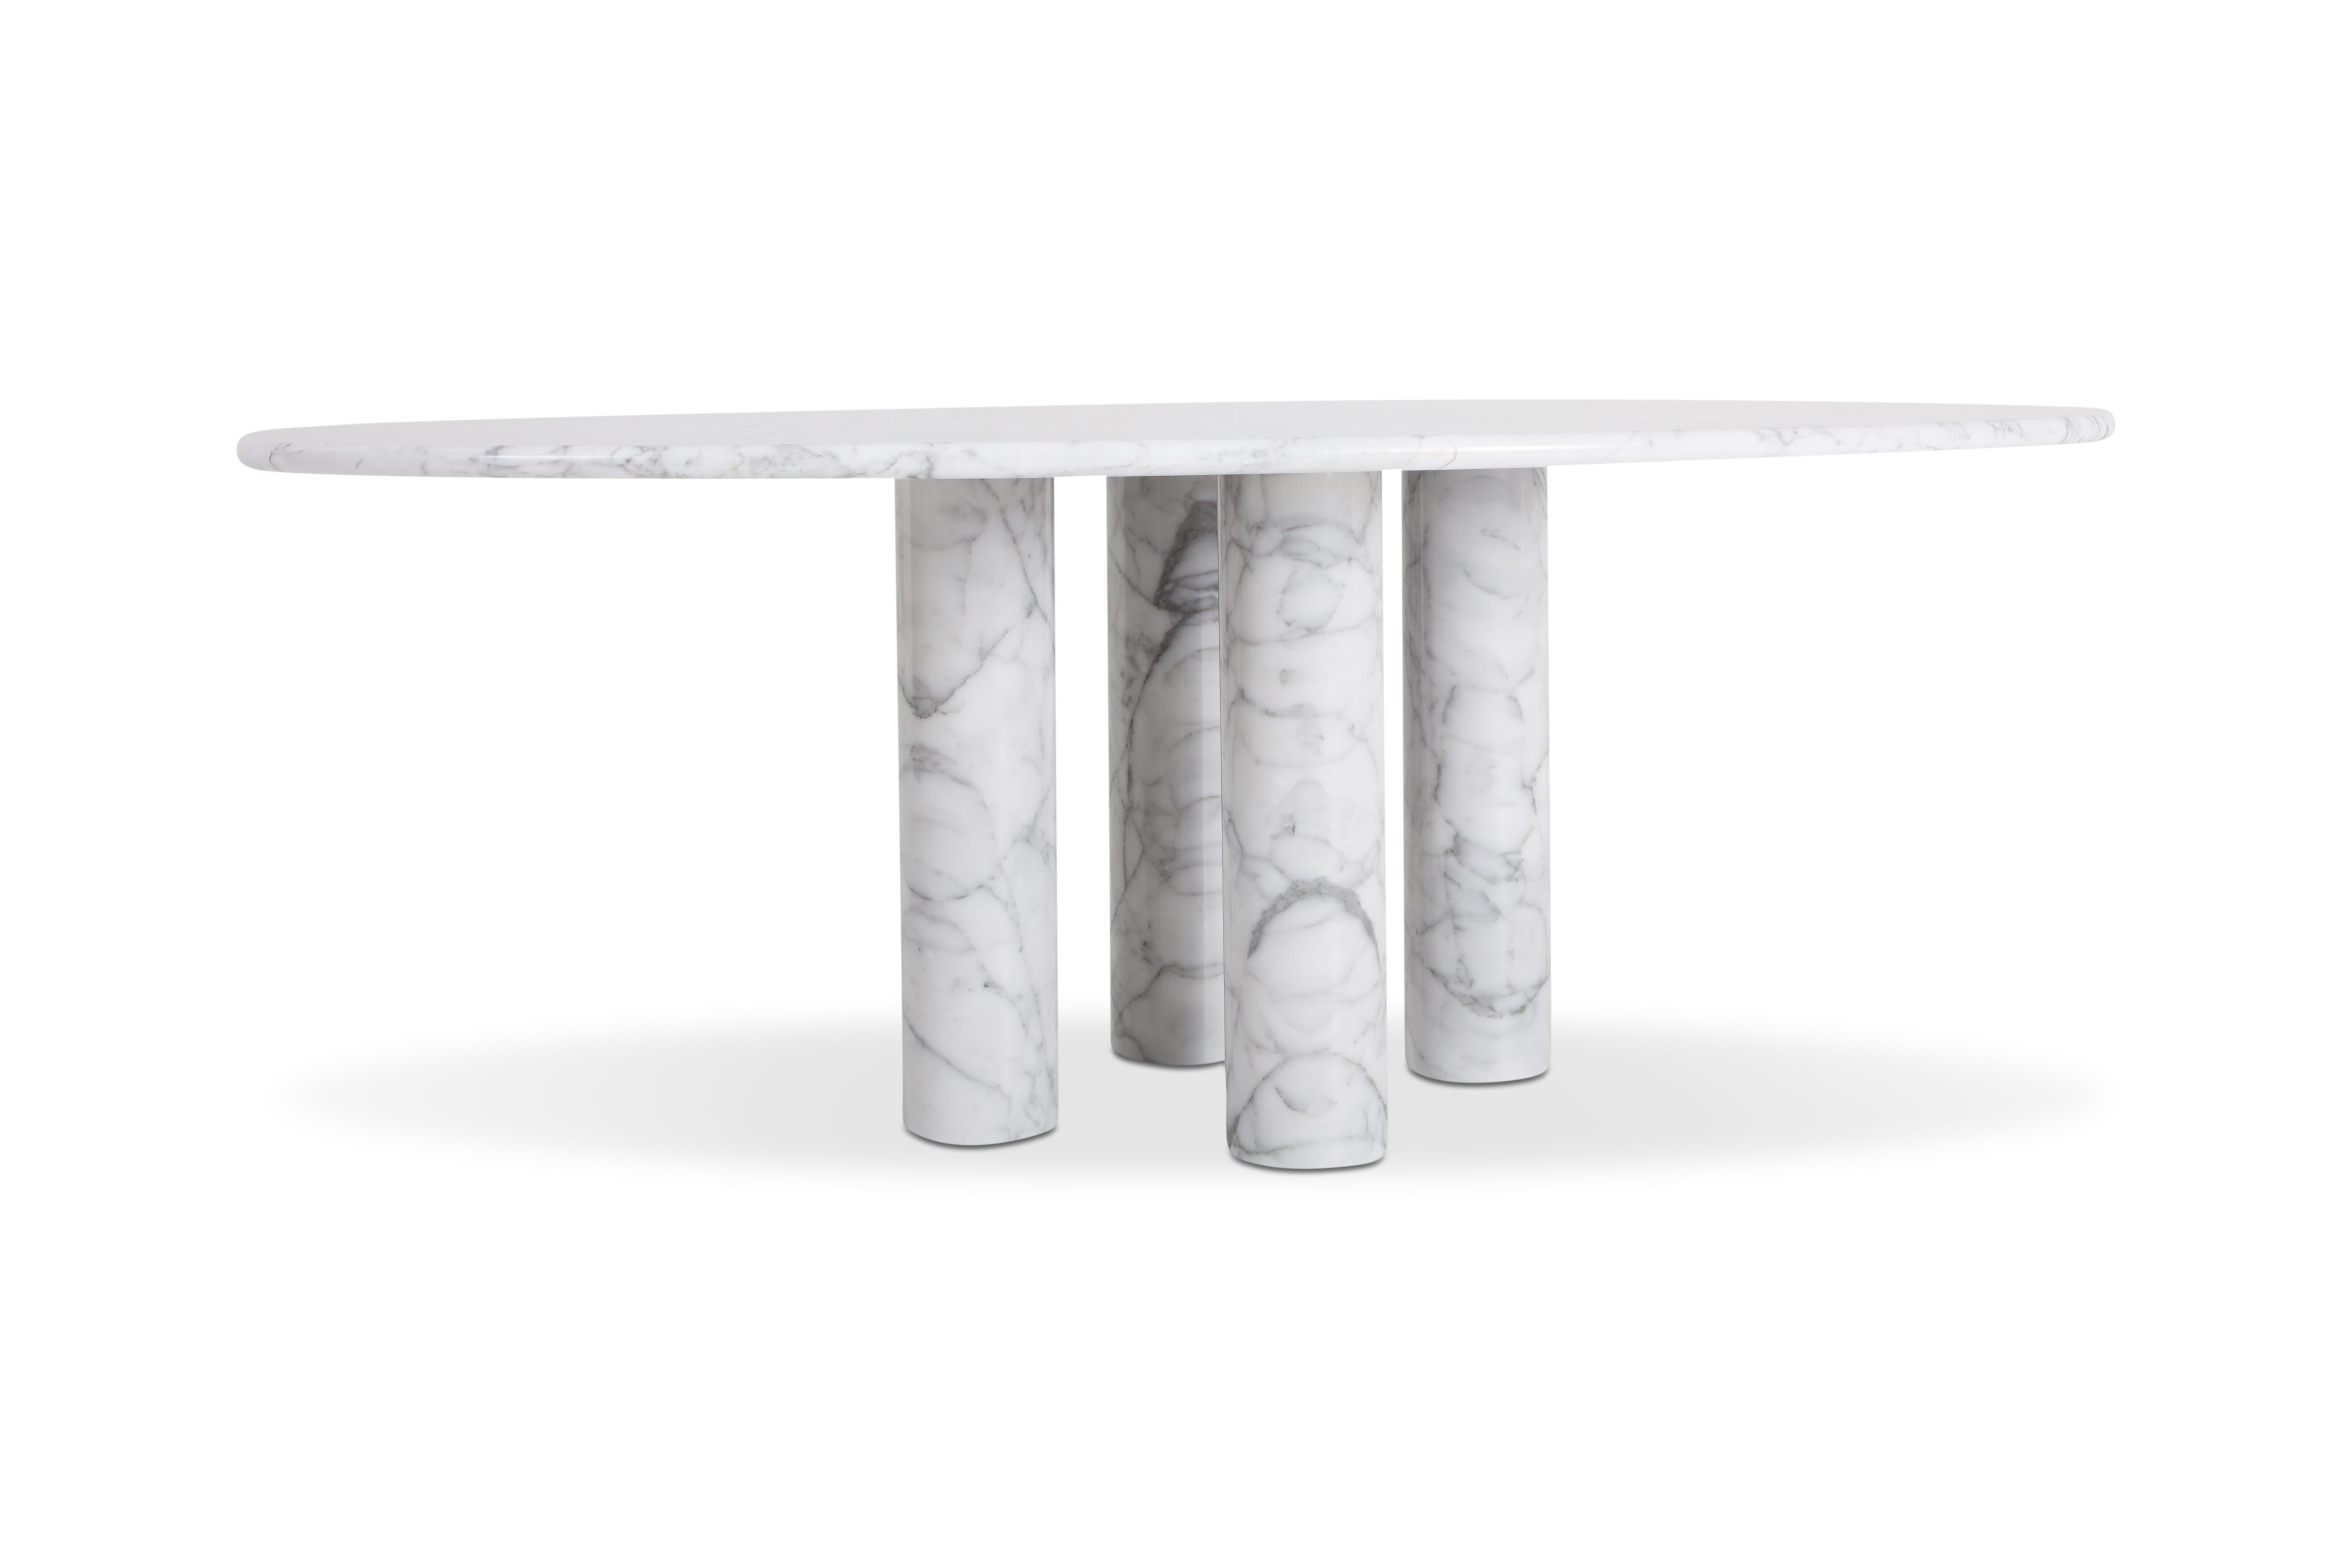 Cassina produced this Il Colonnata dining table by Mario Bellini in Italy 1977.
A forest of massive primordial columns. The sensuality of marble celebrates the material, evoking the mysterious solemnity of Stonehenge.

Mario Bellini (1935-) is